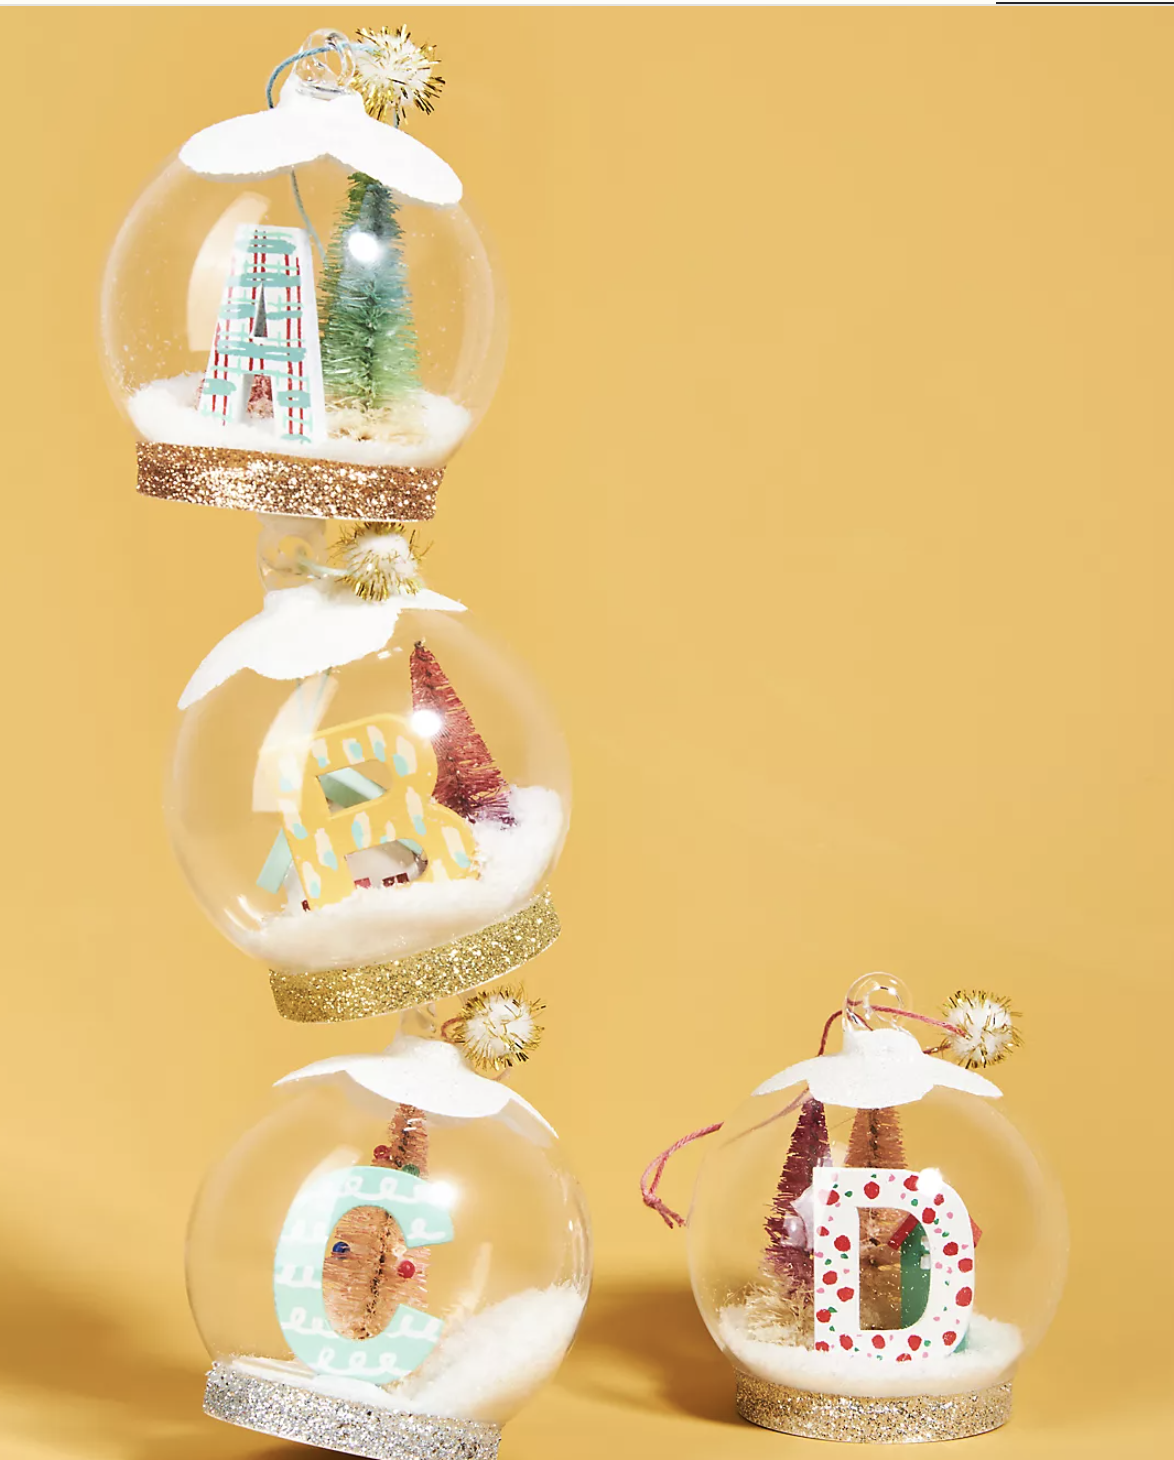 THe snow globe shaped ornaments with letters in them